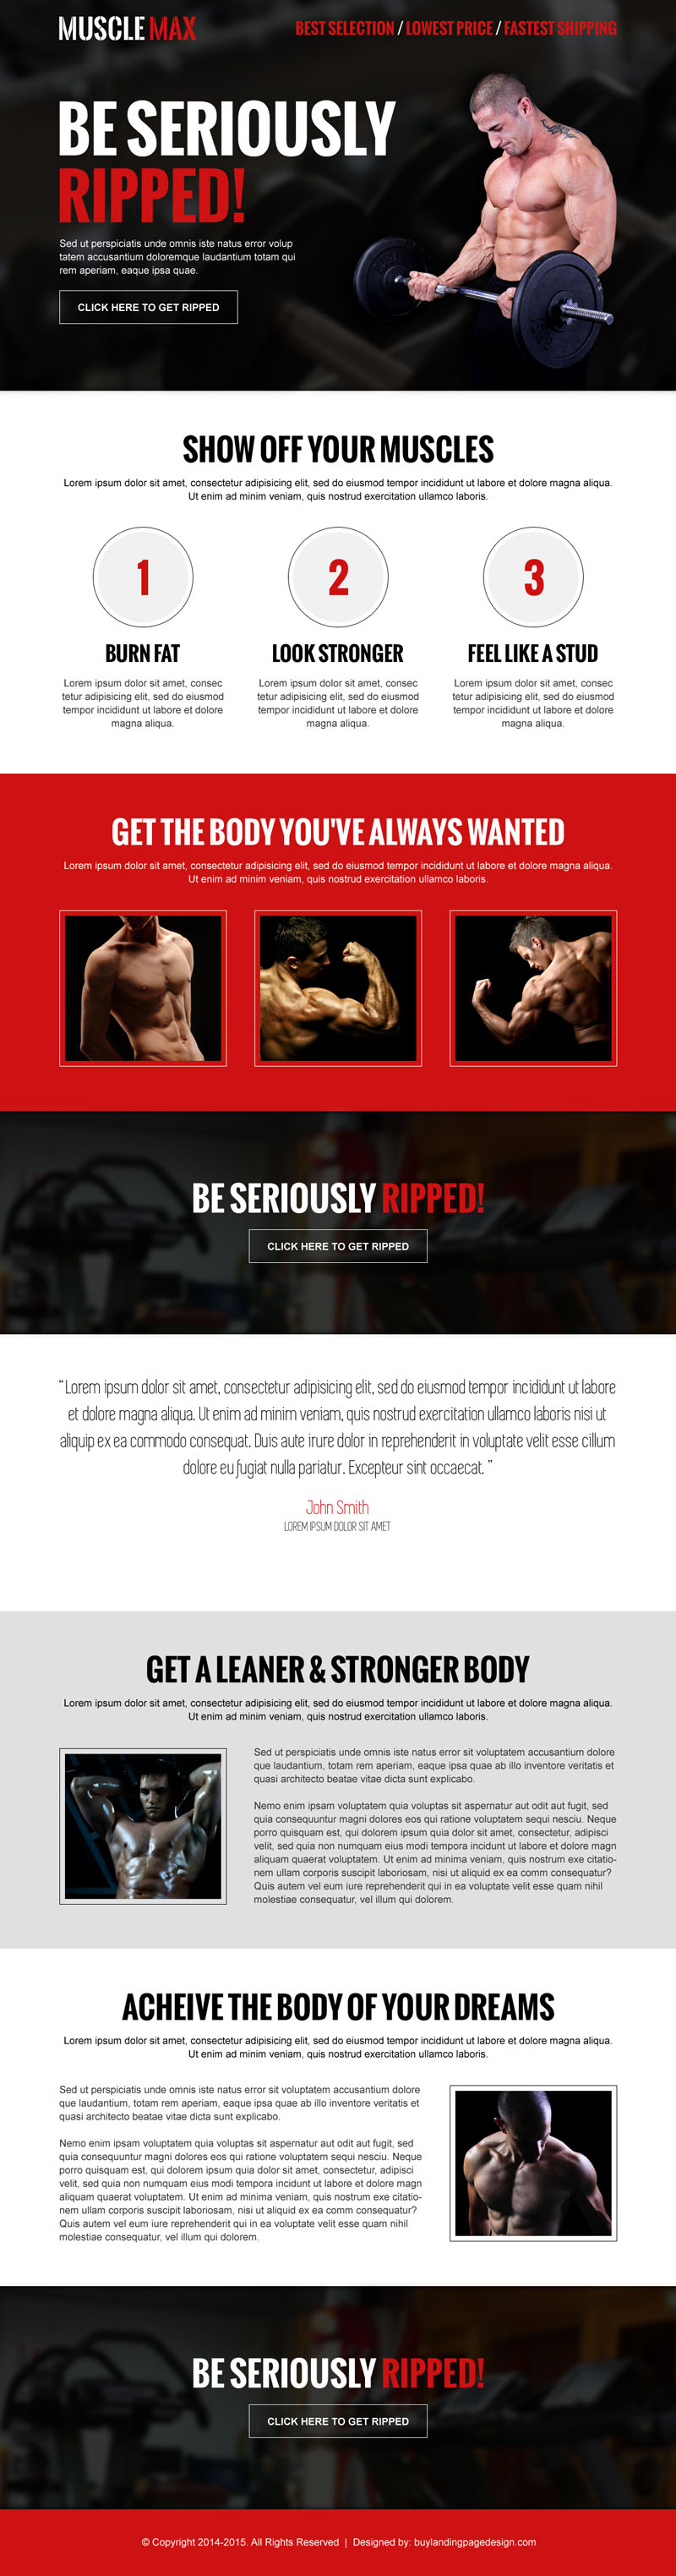 muscle-max-bodybuilding-call-to-action-responsive-landing-page-design-templates-003